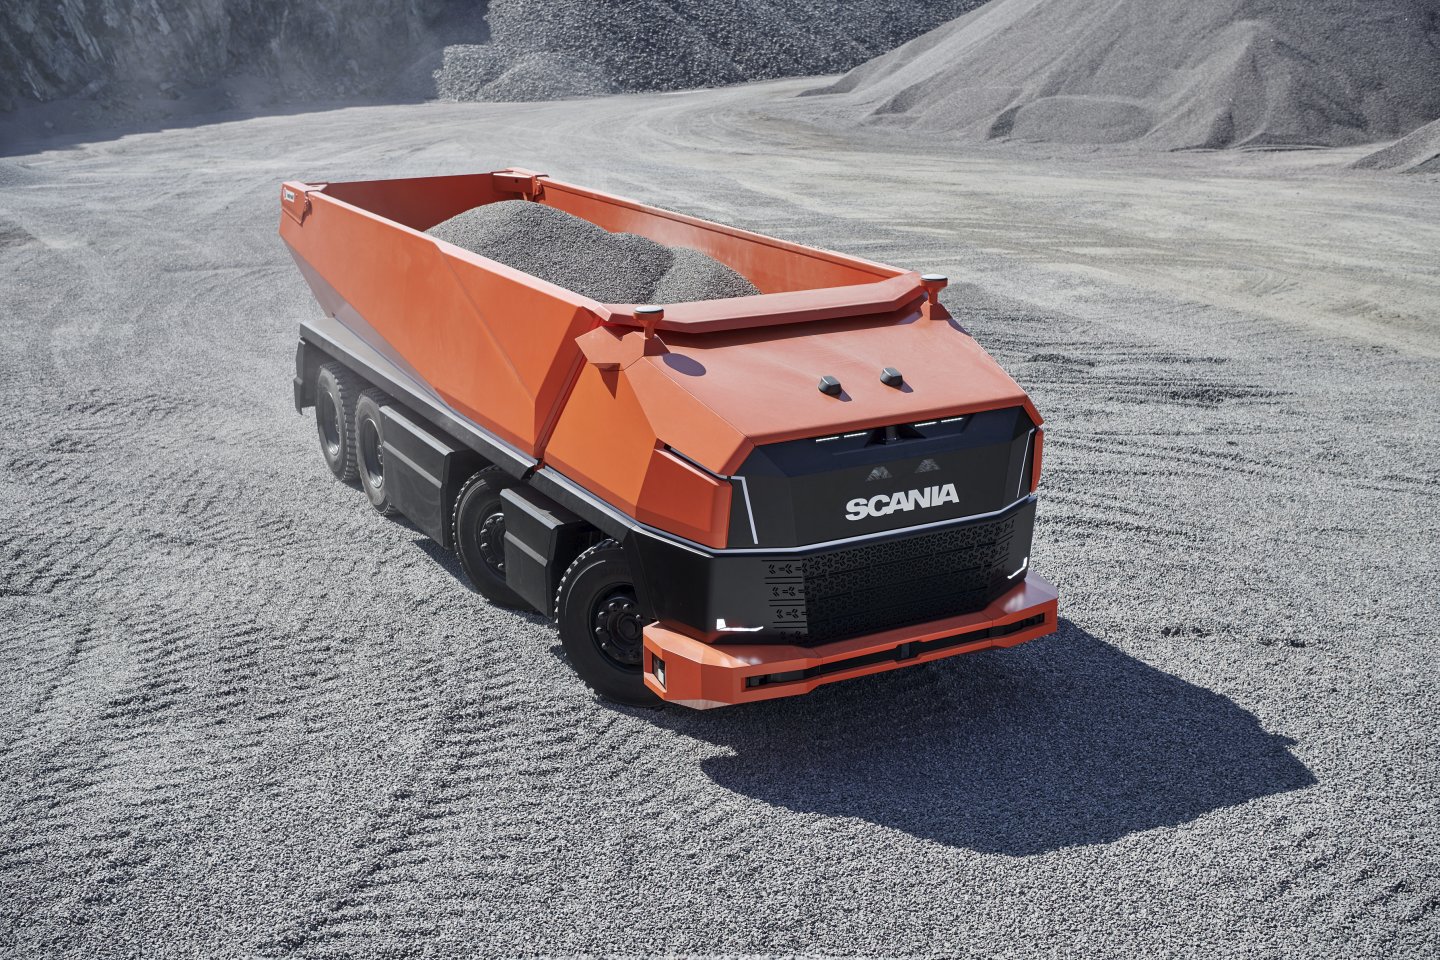 Scania introduced an unmanned dump truck without a cab